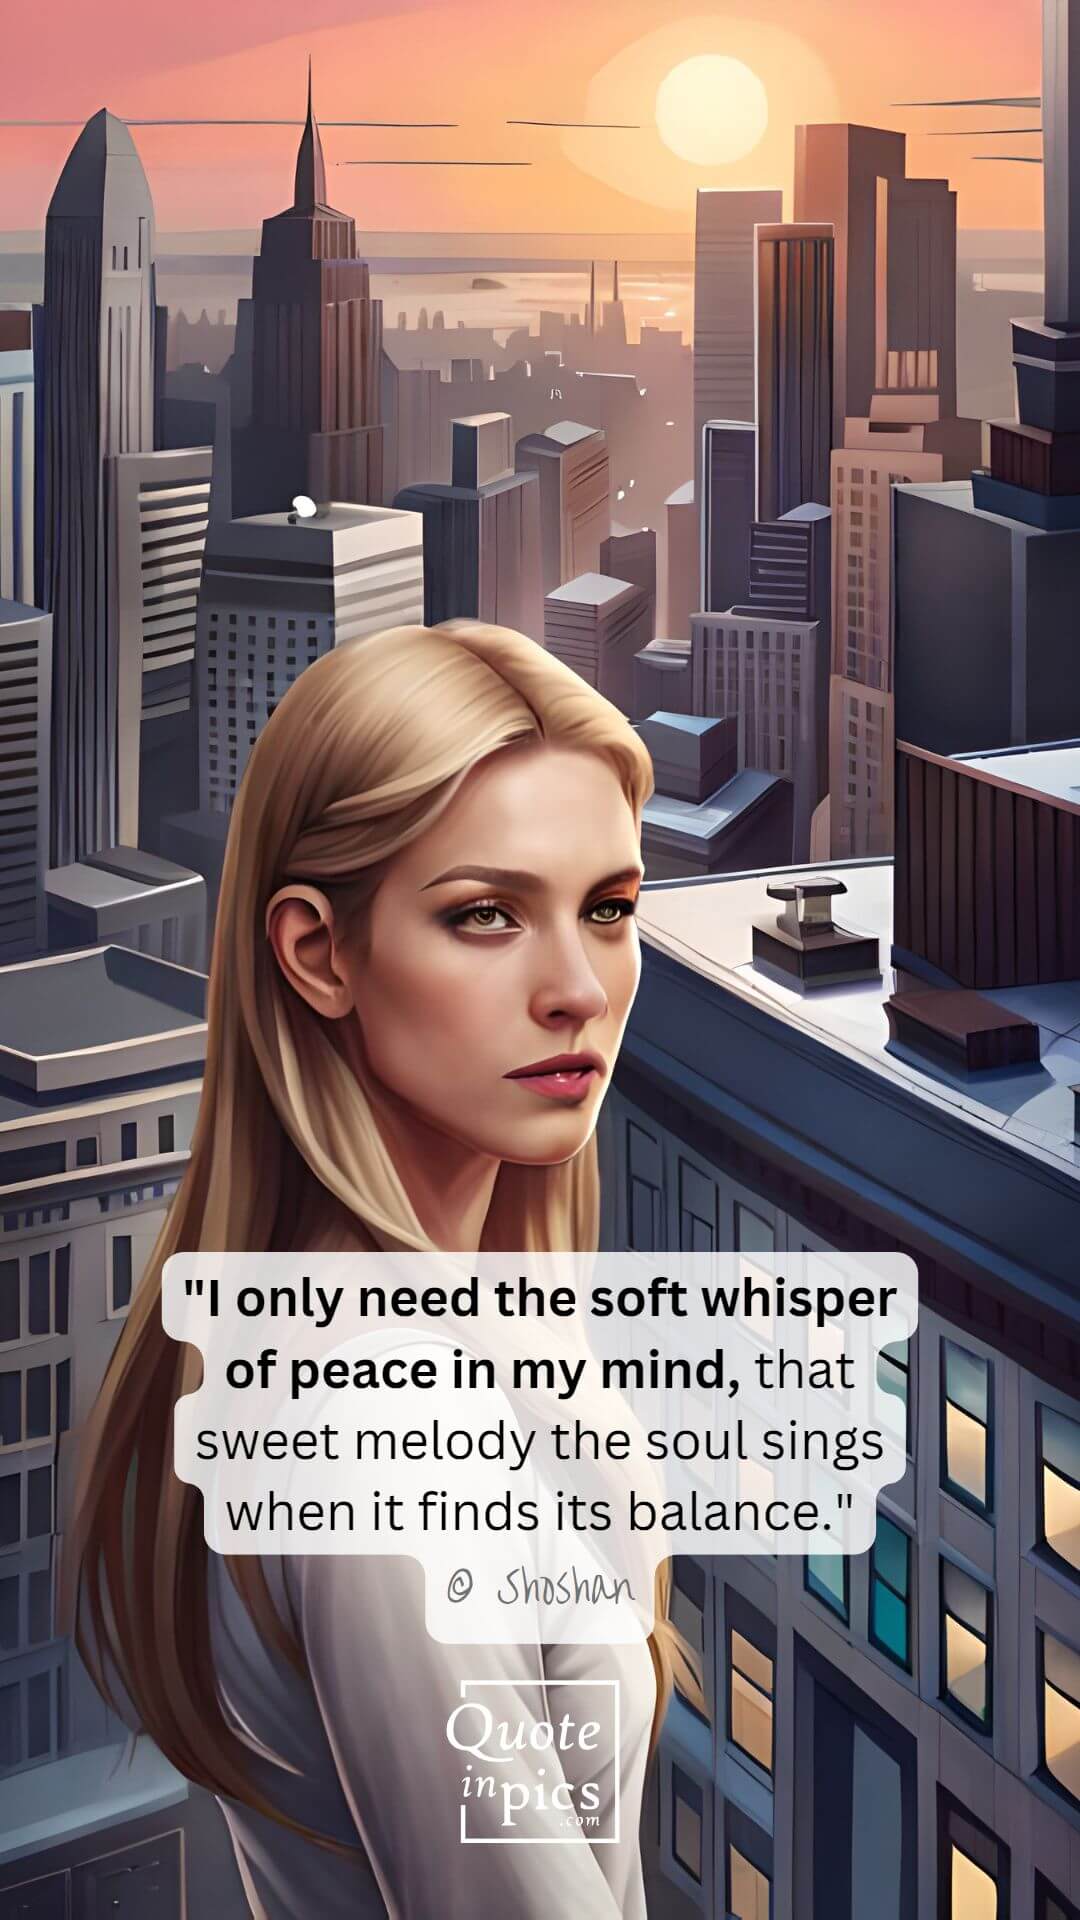 I only need the soft whisper of peace in my mind